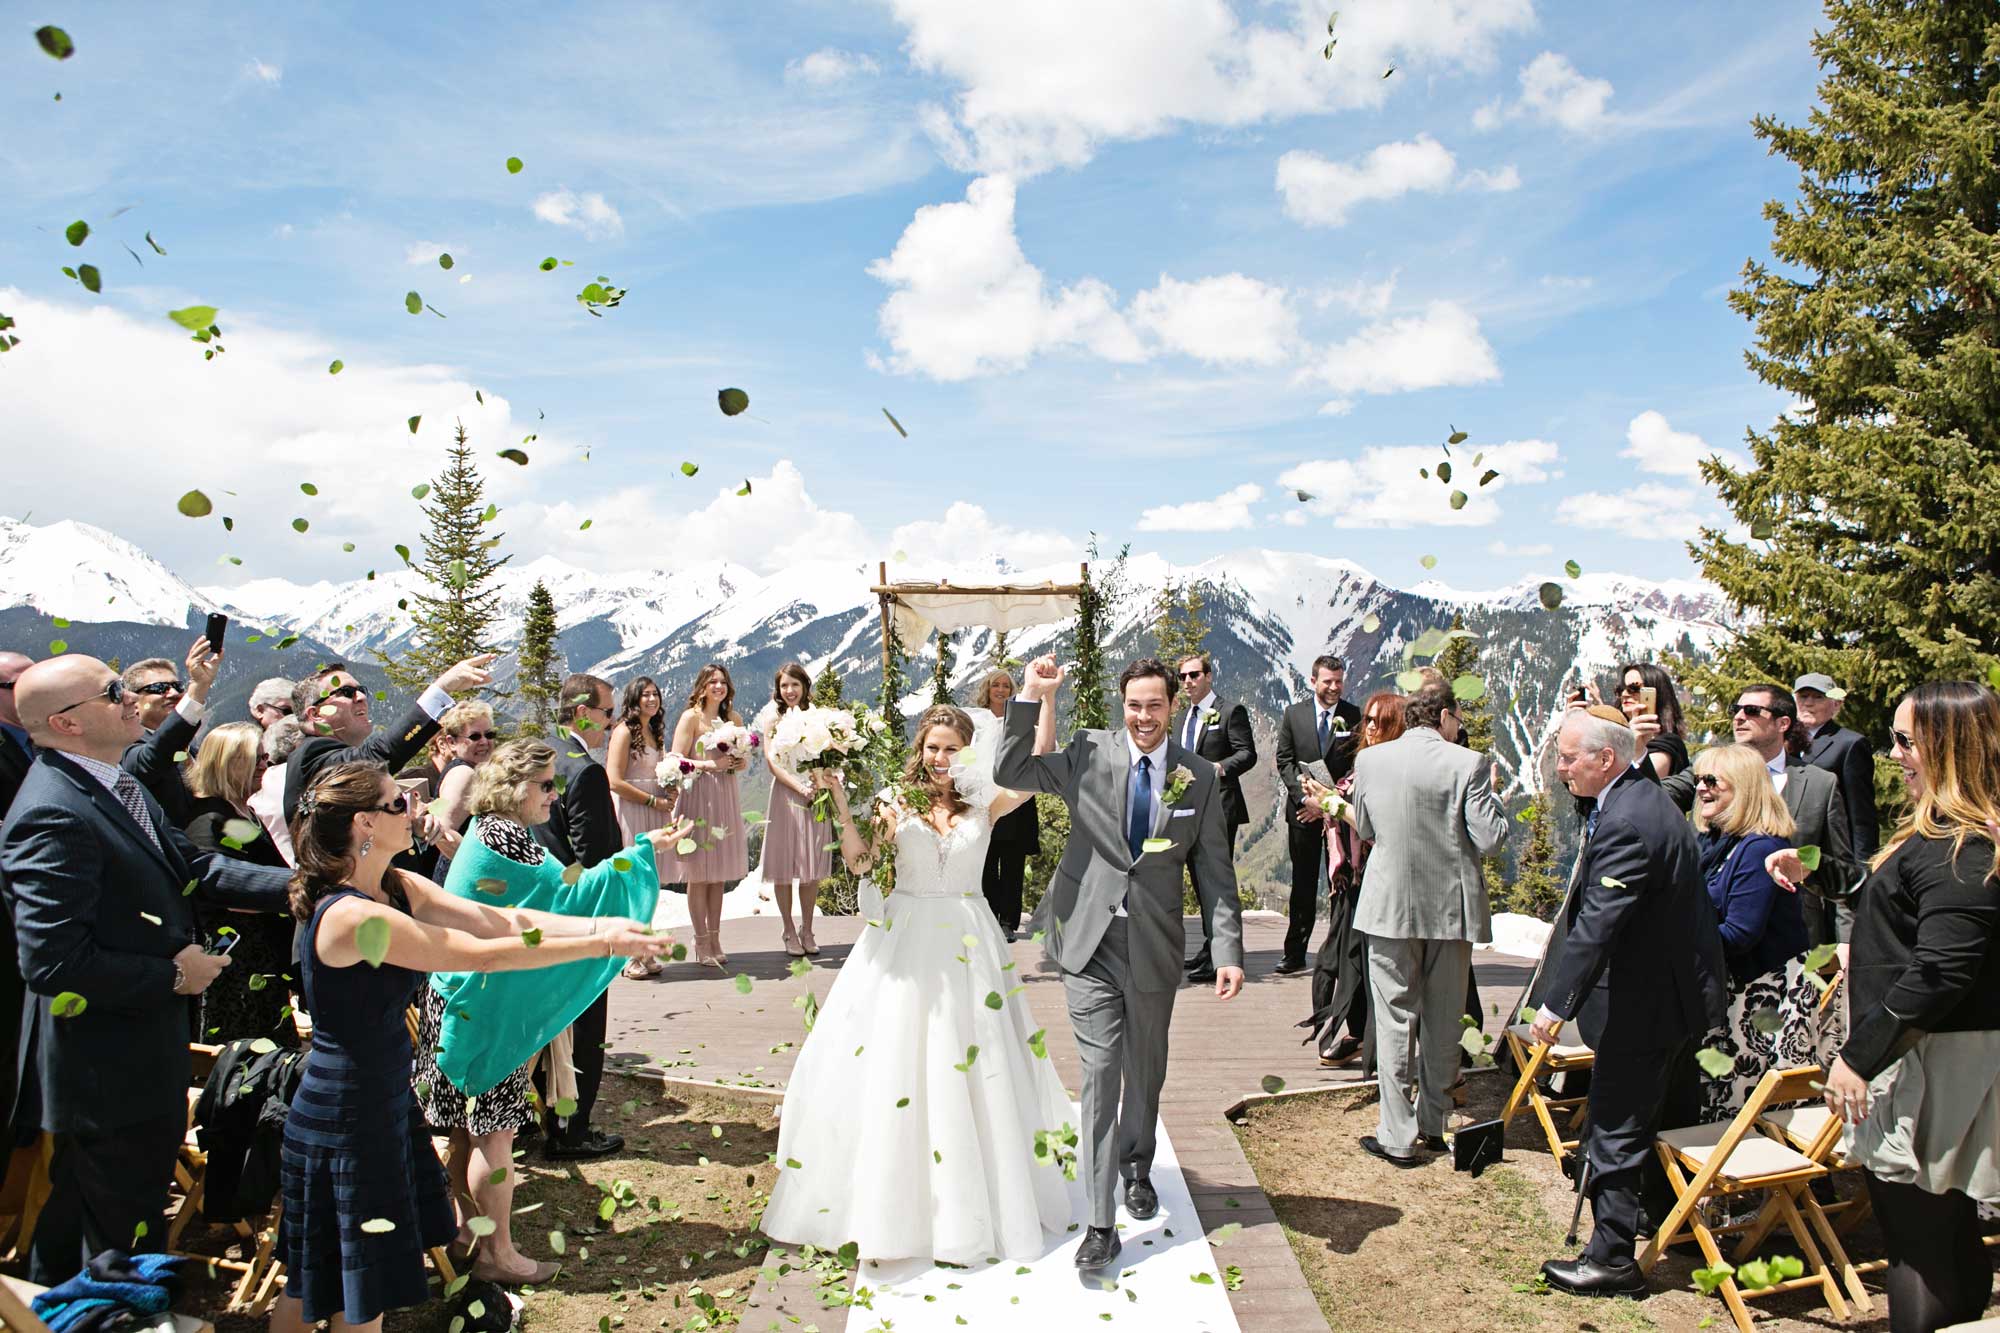 Destination Weddings Venues With Best Views | Unique Places to Get Married | Best Wedding Resorts | The Little Nell, Aspen